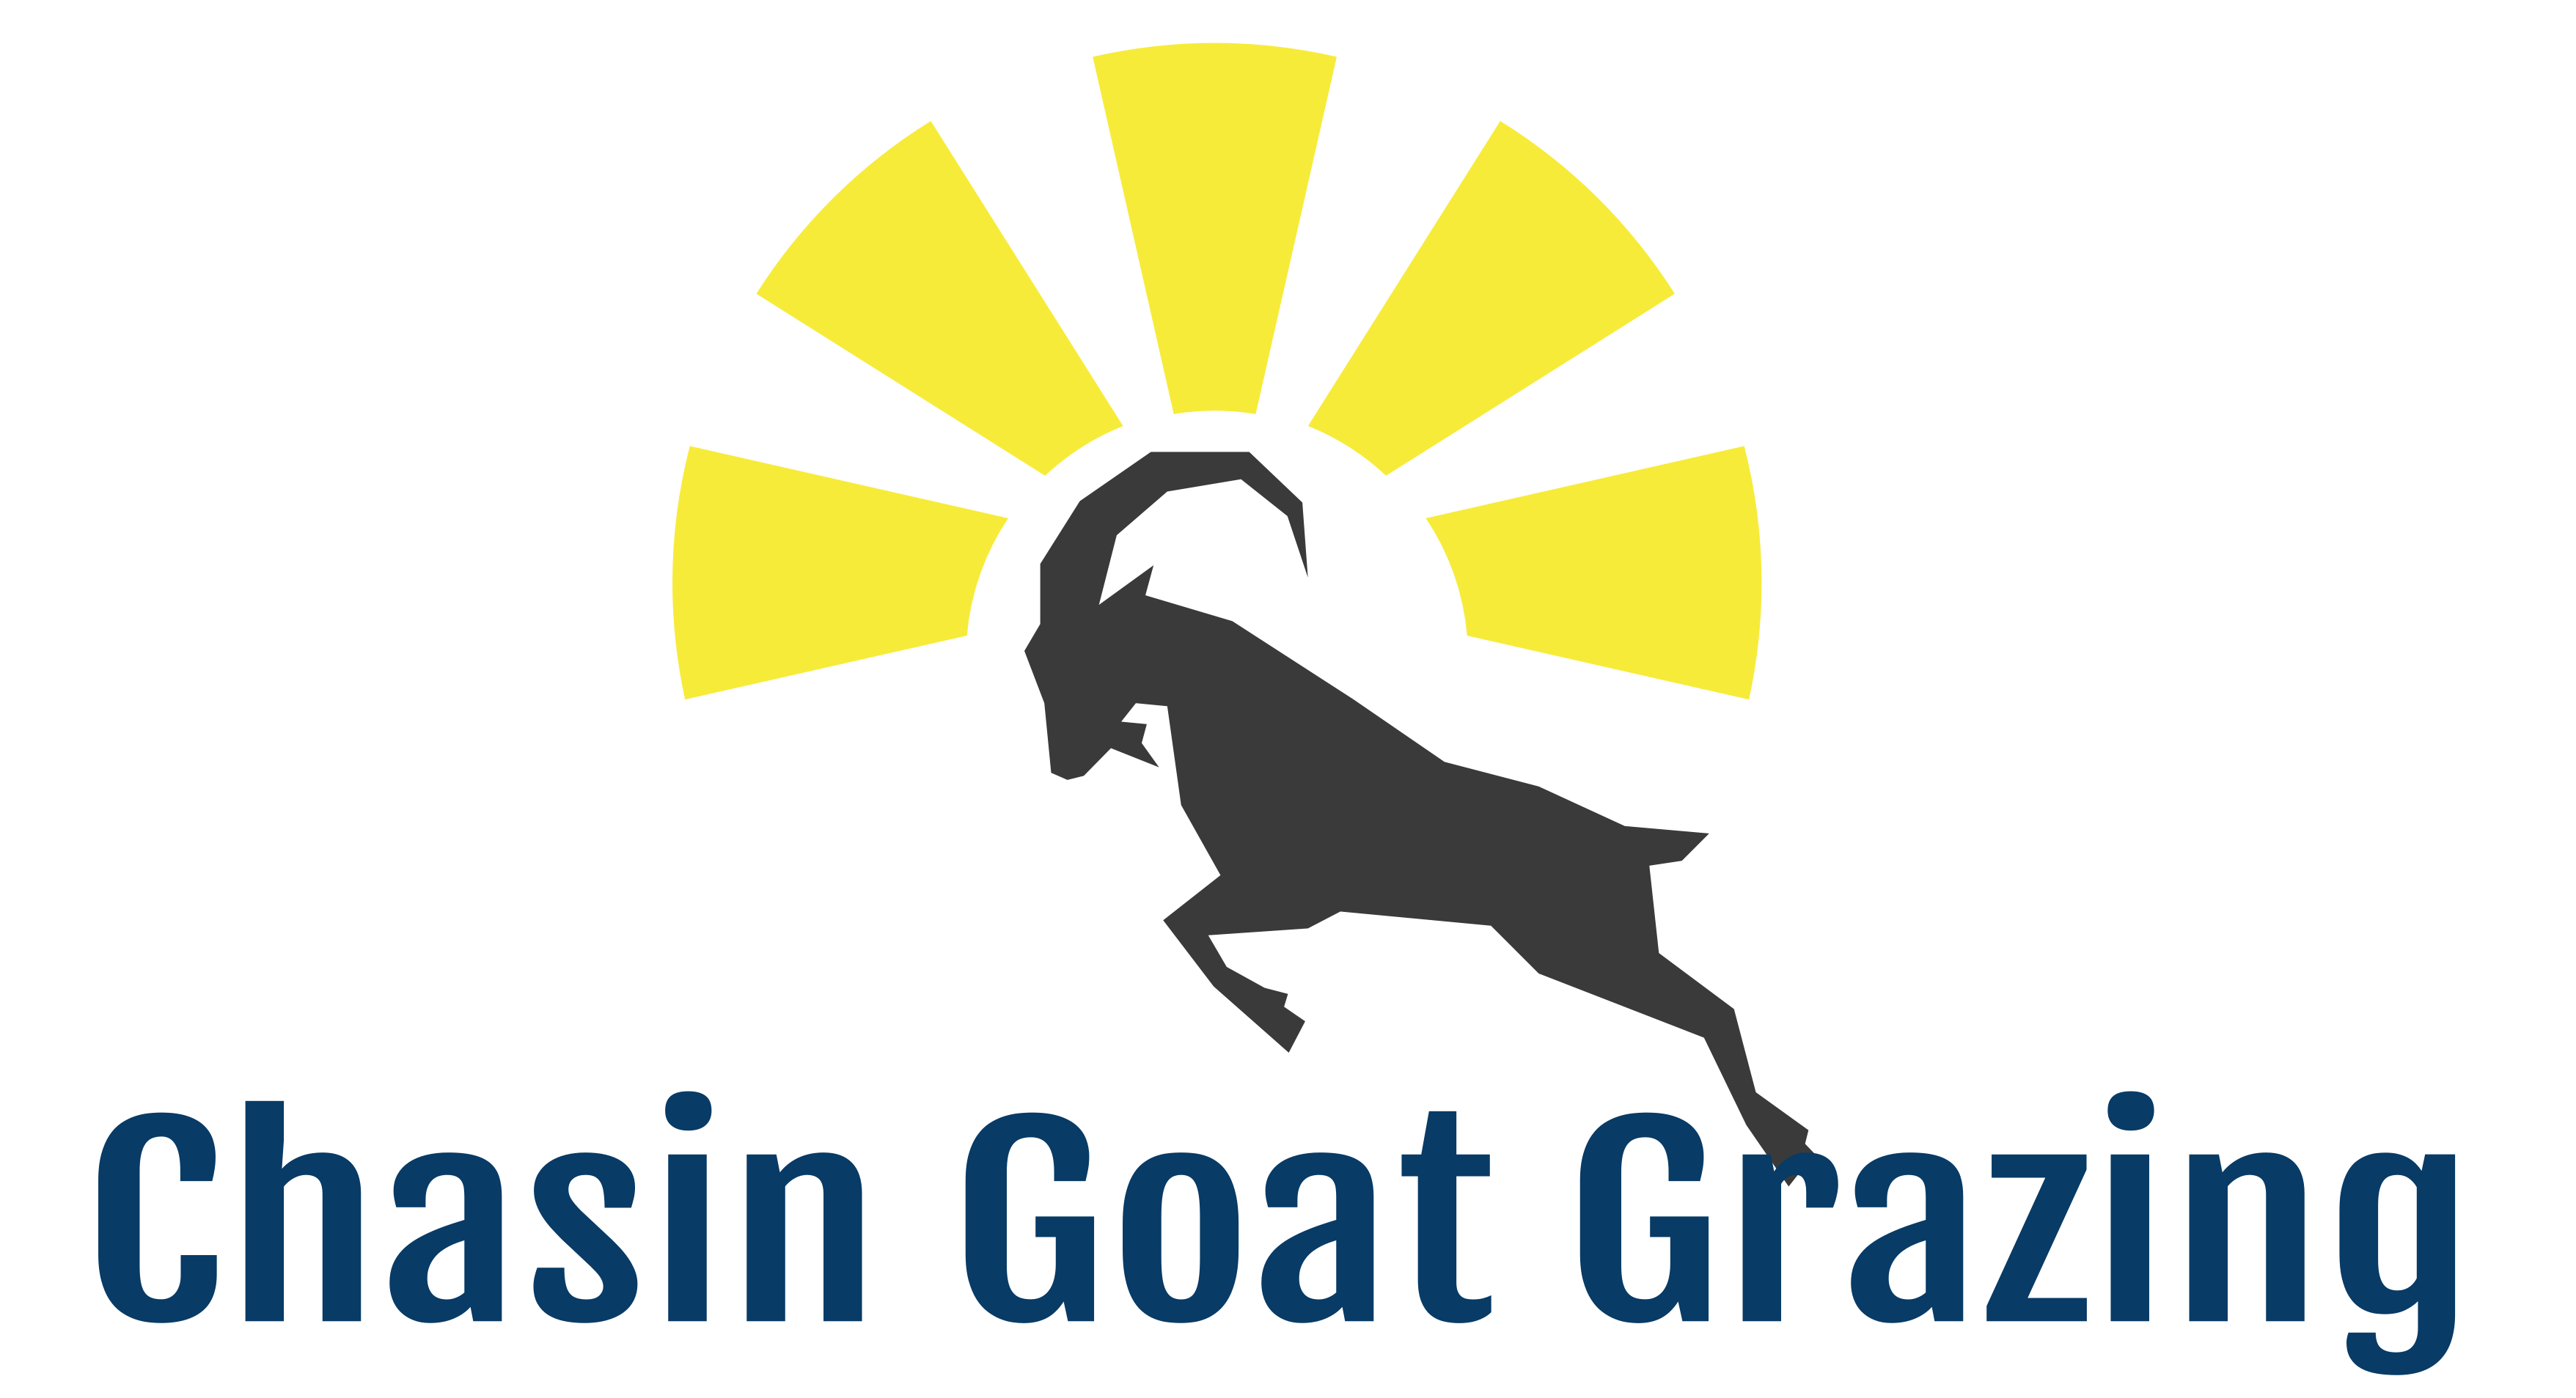 And land management in. Clipart goat goat grazing